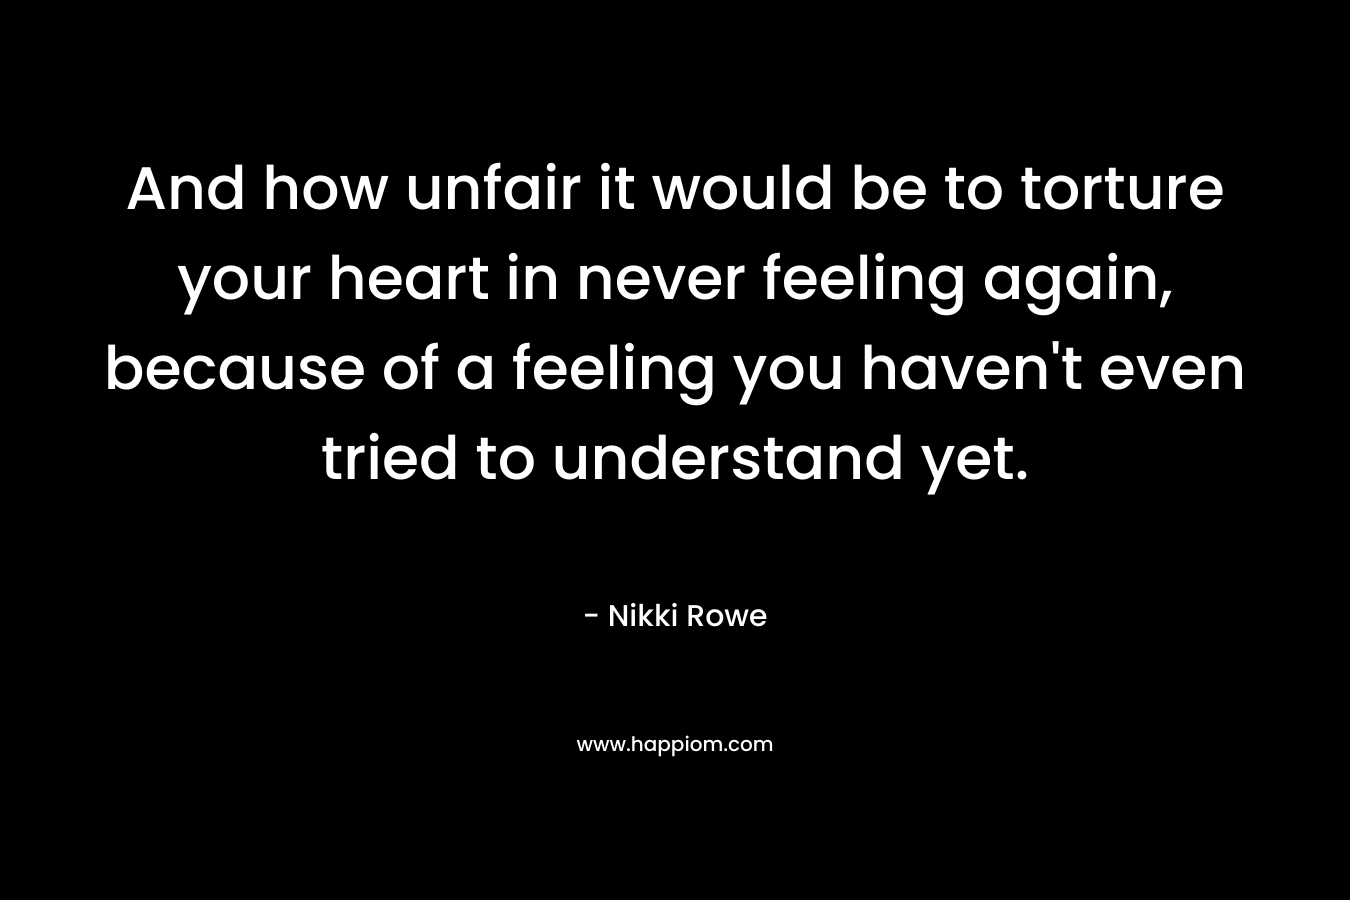 And how unfair it would be to torture your heart in never feeling again, because of a feeling you haven't even tried to understand yet.